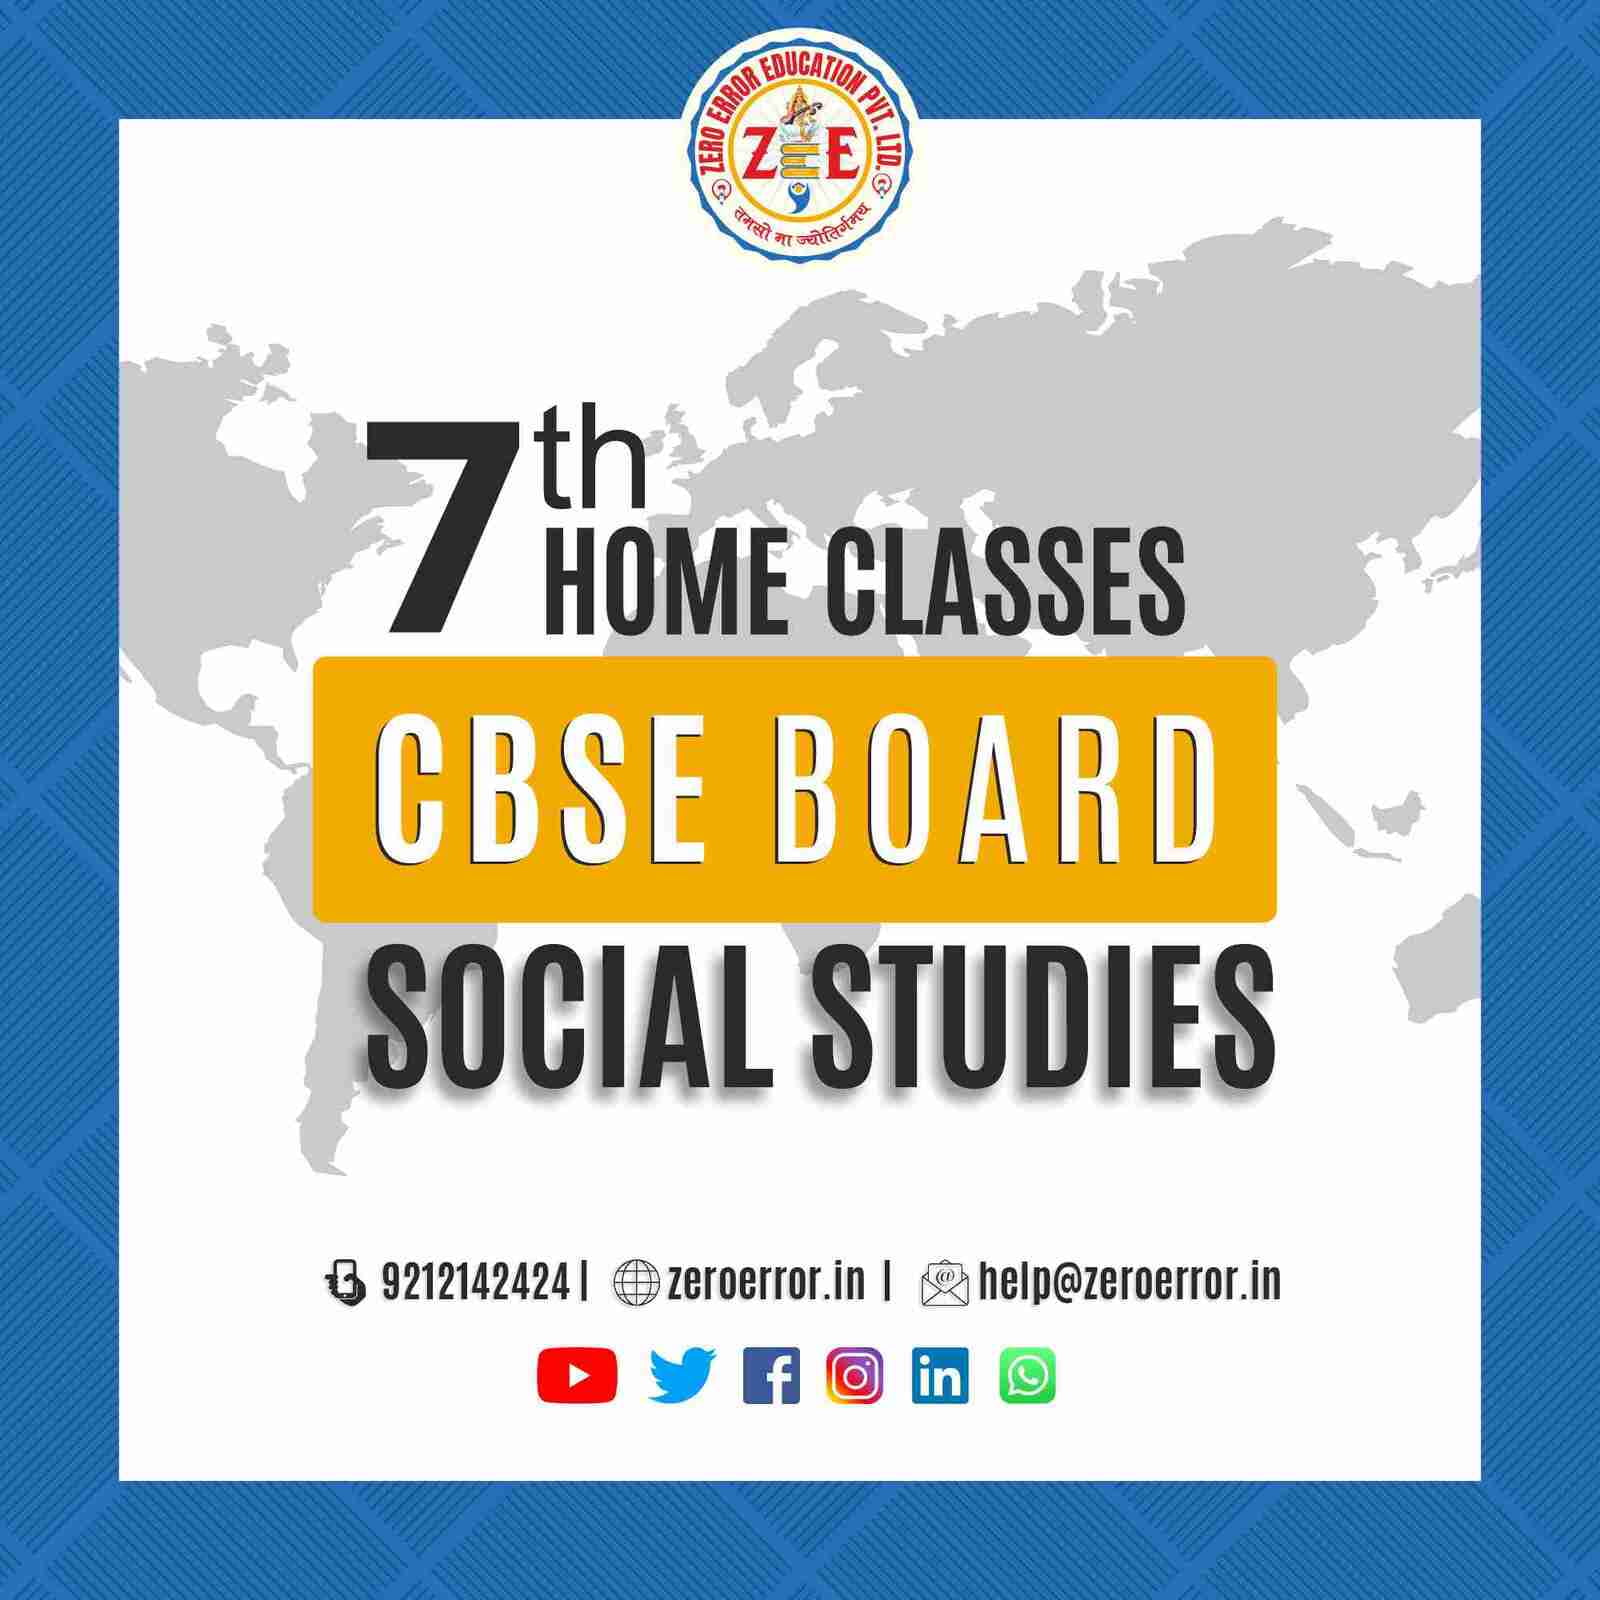 7th Grade CBSE Social Science Online Classes by Zero Error Education Prepare for your CBSE board exams with online and offline SST classes for 7th grade. Learn from experienced home tutors and get all the help you need to succeed. Enroll today at Zero Error Education. [https://zeroerror.in/] Call 9212142424 for more information.